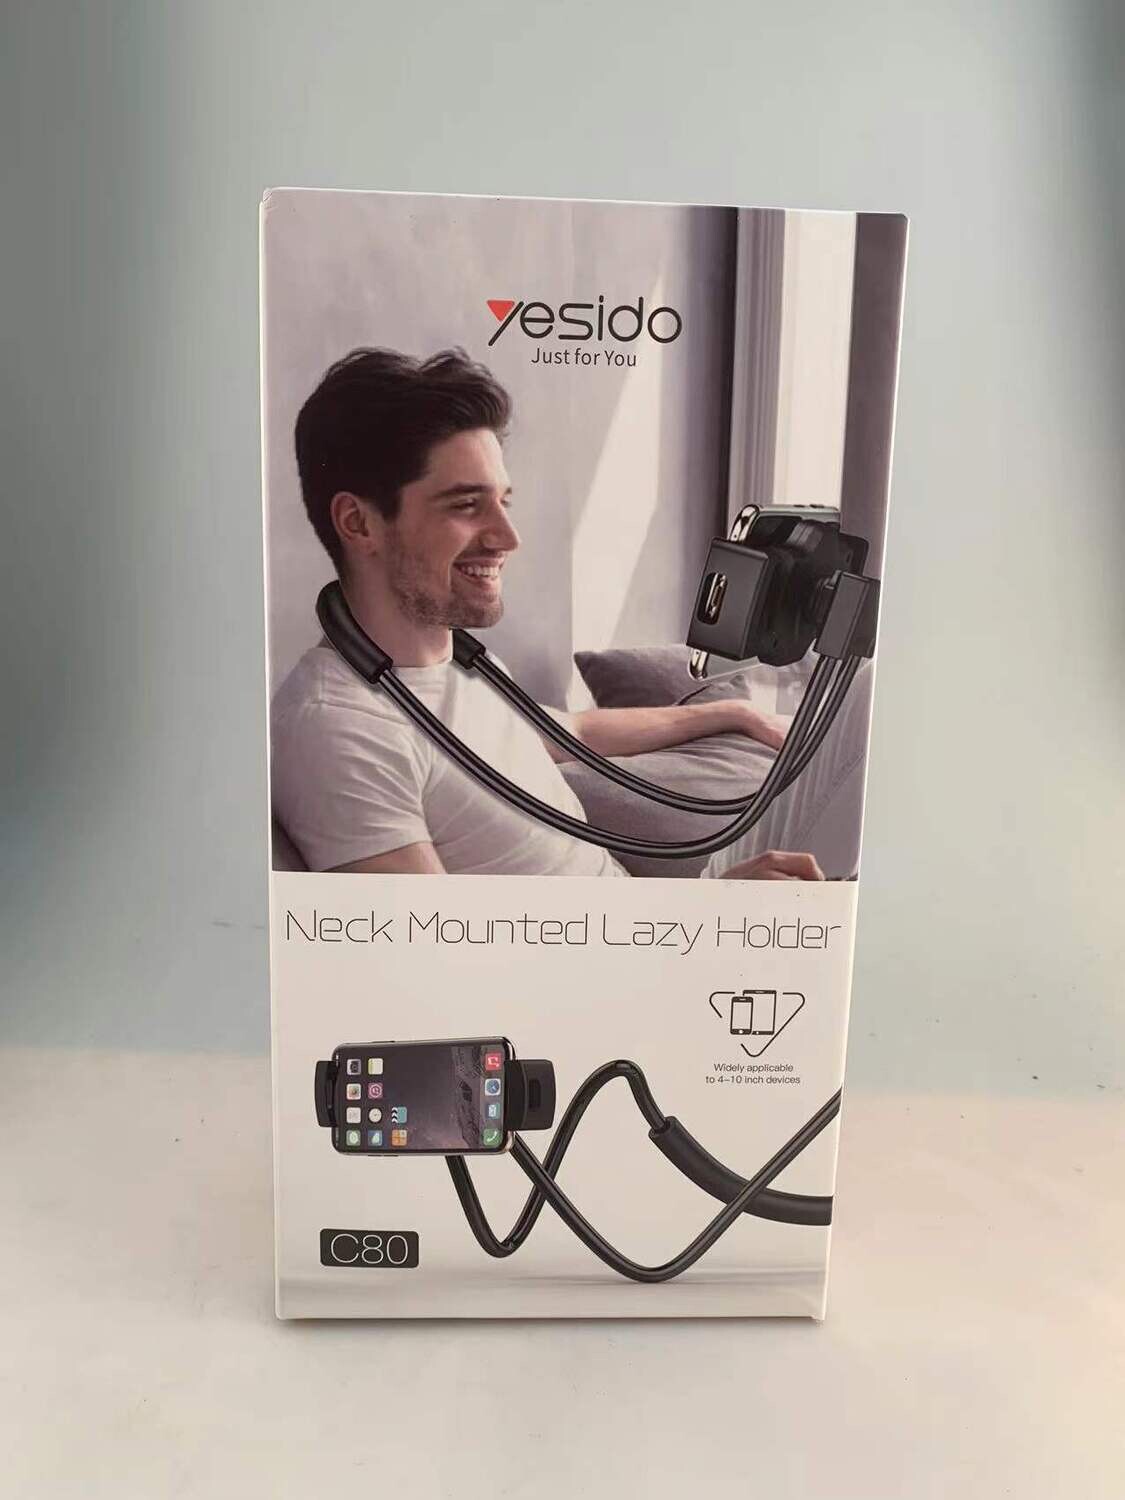 Holder C80 Lazy Mobile phone tablet stand